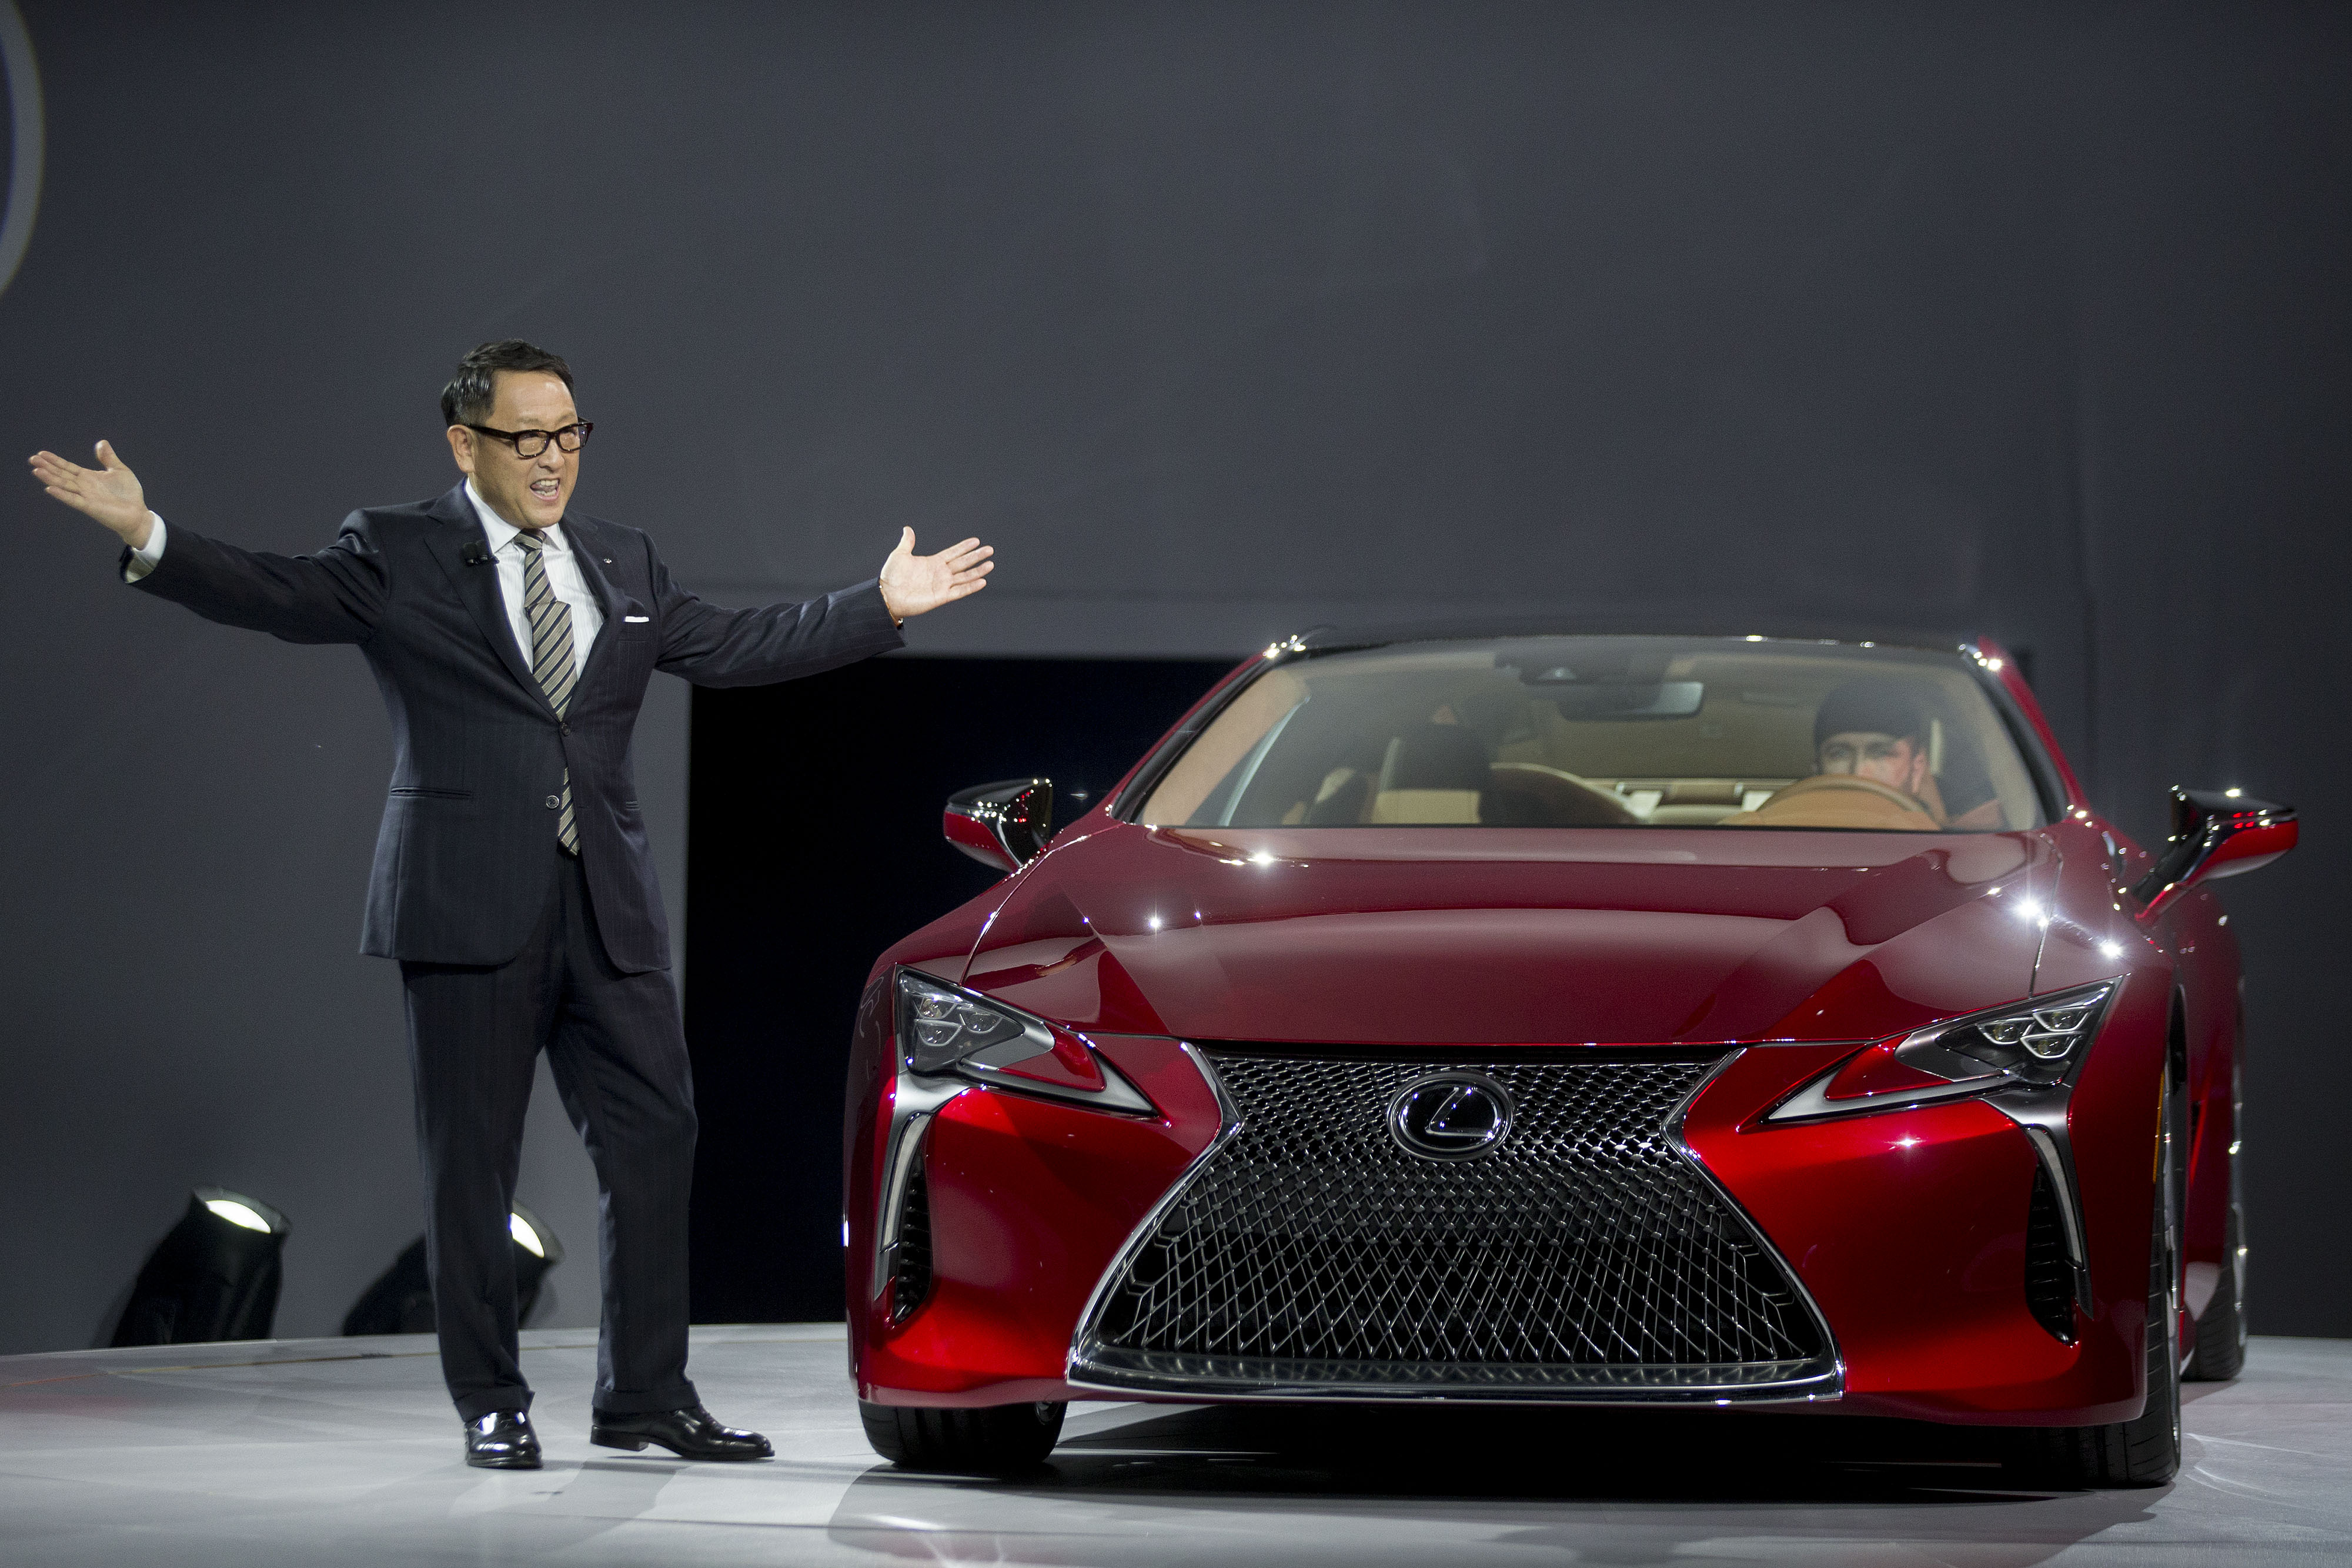 Akio Toyoda, president of Toyota Motor Corp., gestures while standing next to a Lexus LC 500 after being unveiled during the 2016 North American International Auto Show (NAIAS) in Detroit, Michigan, U.S., on Monday, Jan. 11, 2016. (Bloomberg&mdash;Bloomberg via Getty Images)